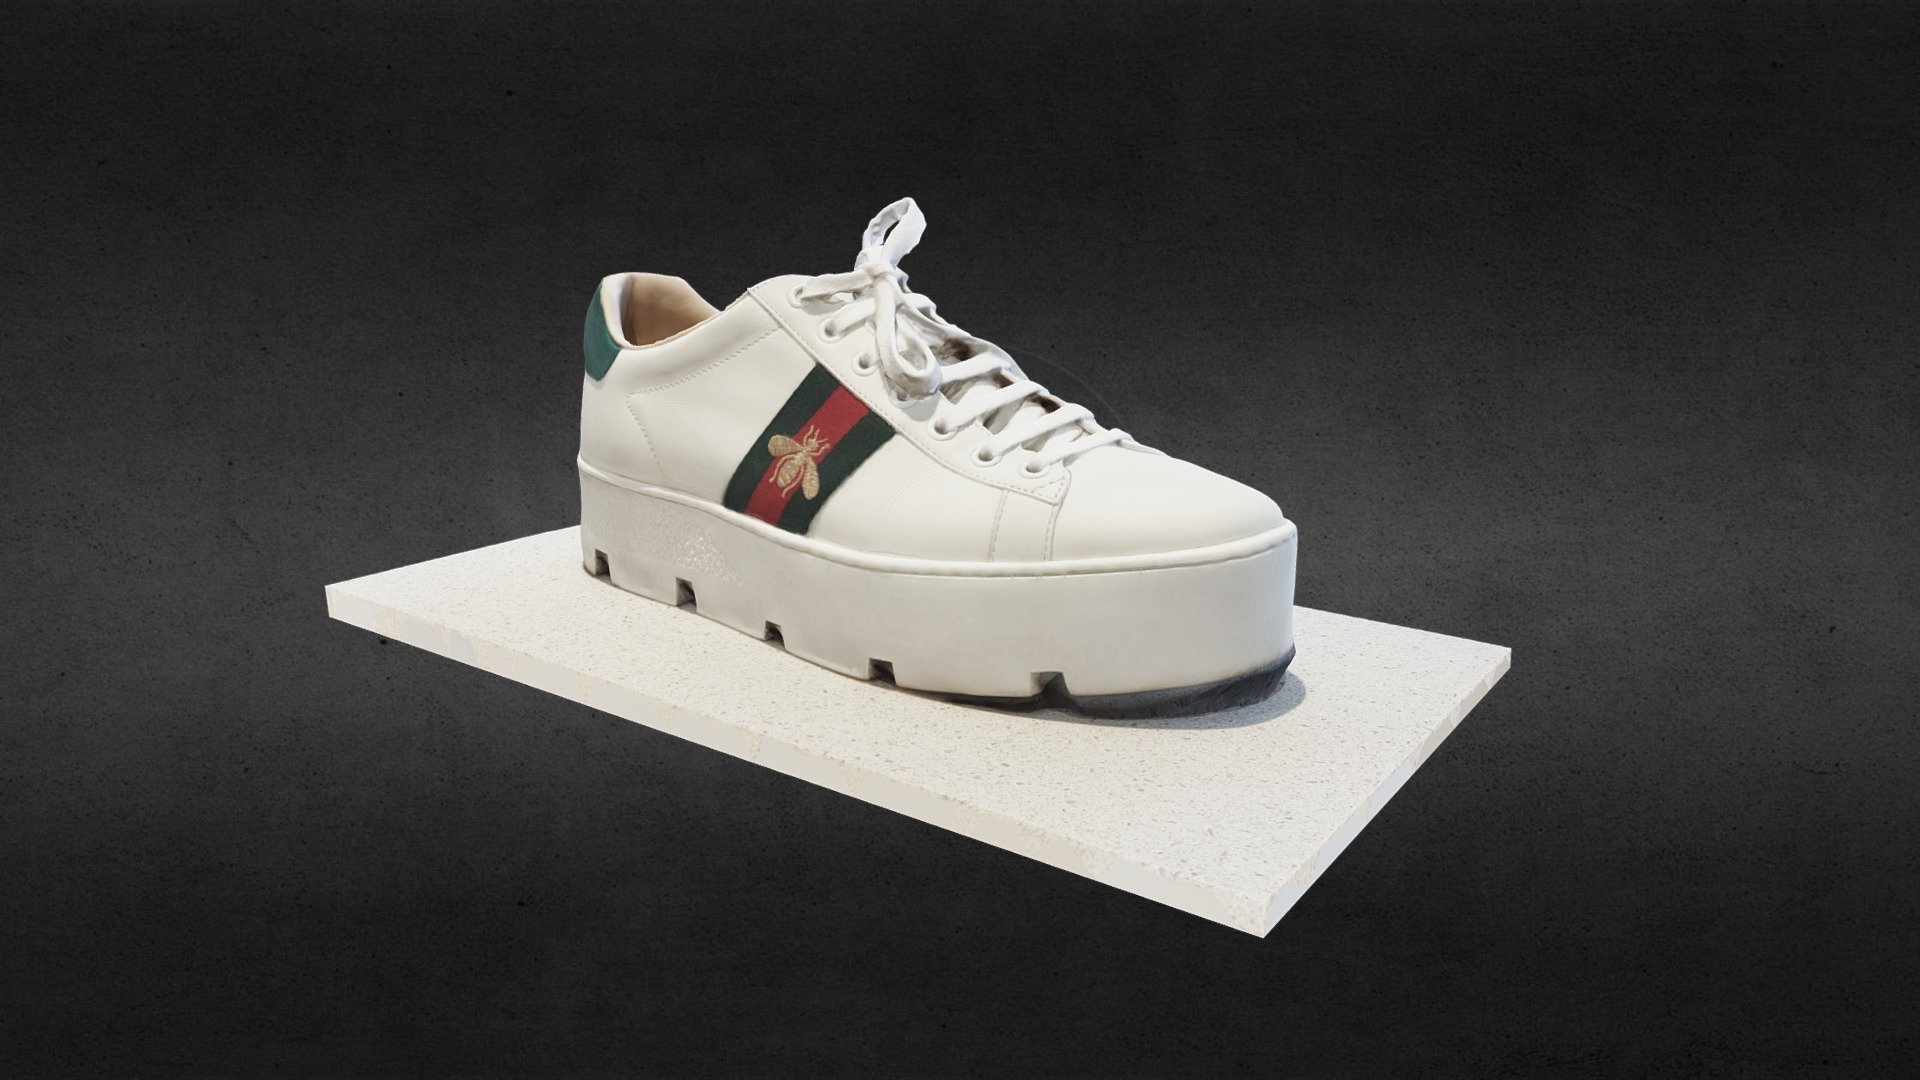 A raw 3D scan of one of my friend's Gucci shoes. (Substance painter cleanup coming soon)

The geometry and textures are decimated to 350K and 3K 3d model